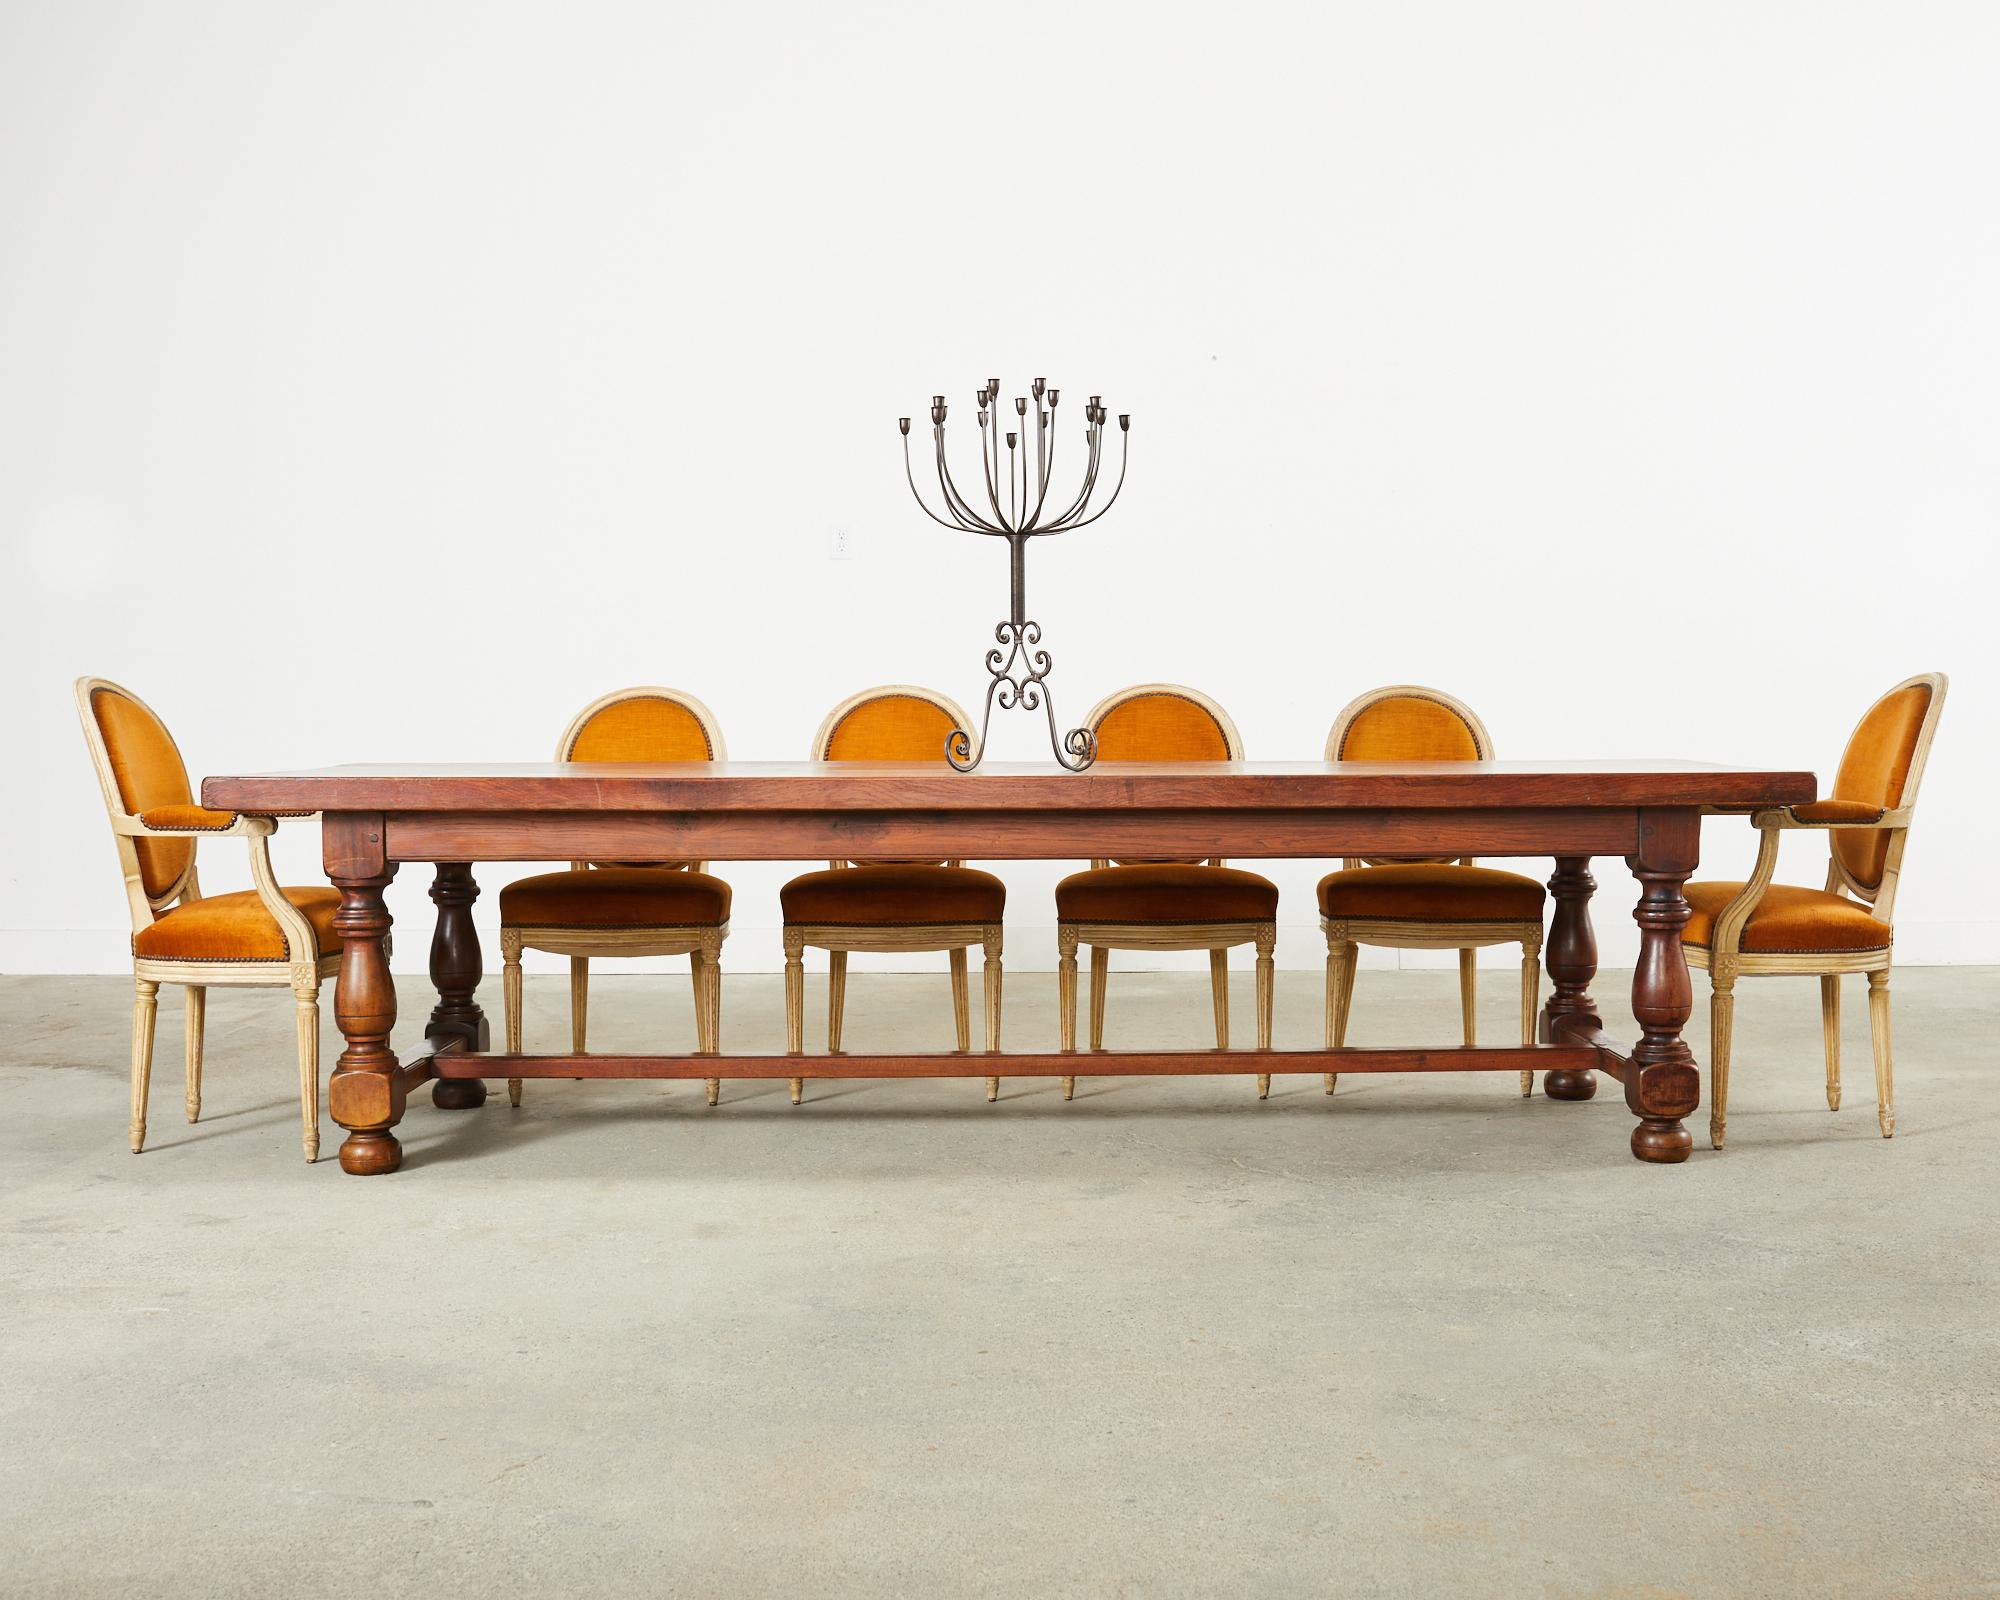 Substantial country French provincial dining table or harvest table hand-crafted from oak timbers. The monumental top planks are 2.5 inches thick and supported by a trestle style base. Constructed with large wood peg joinery the table has ample